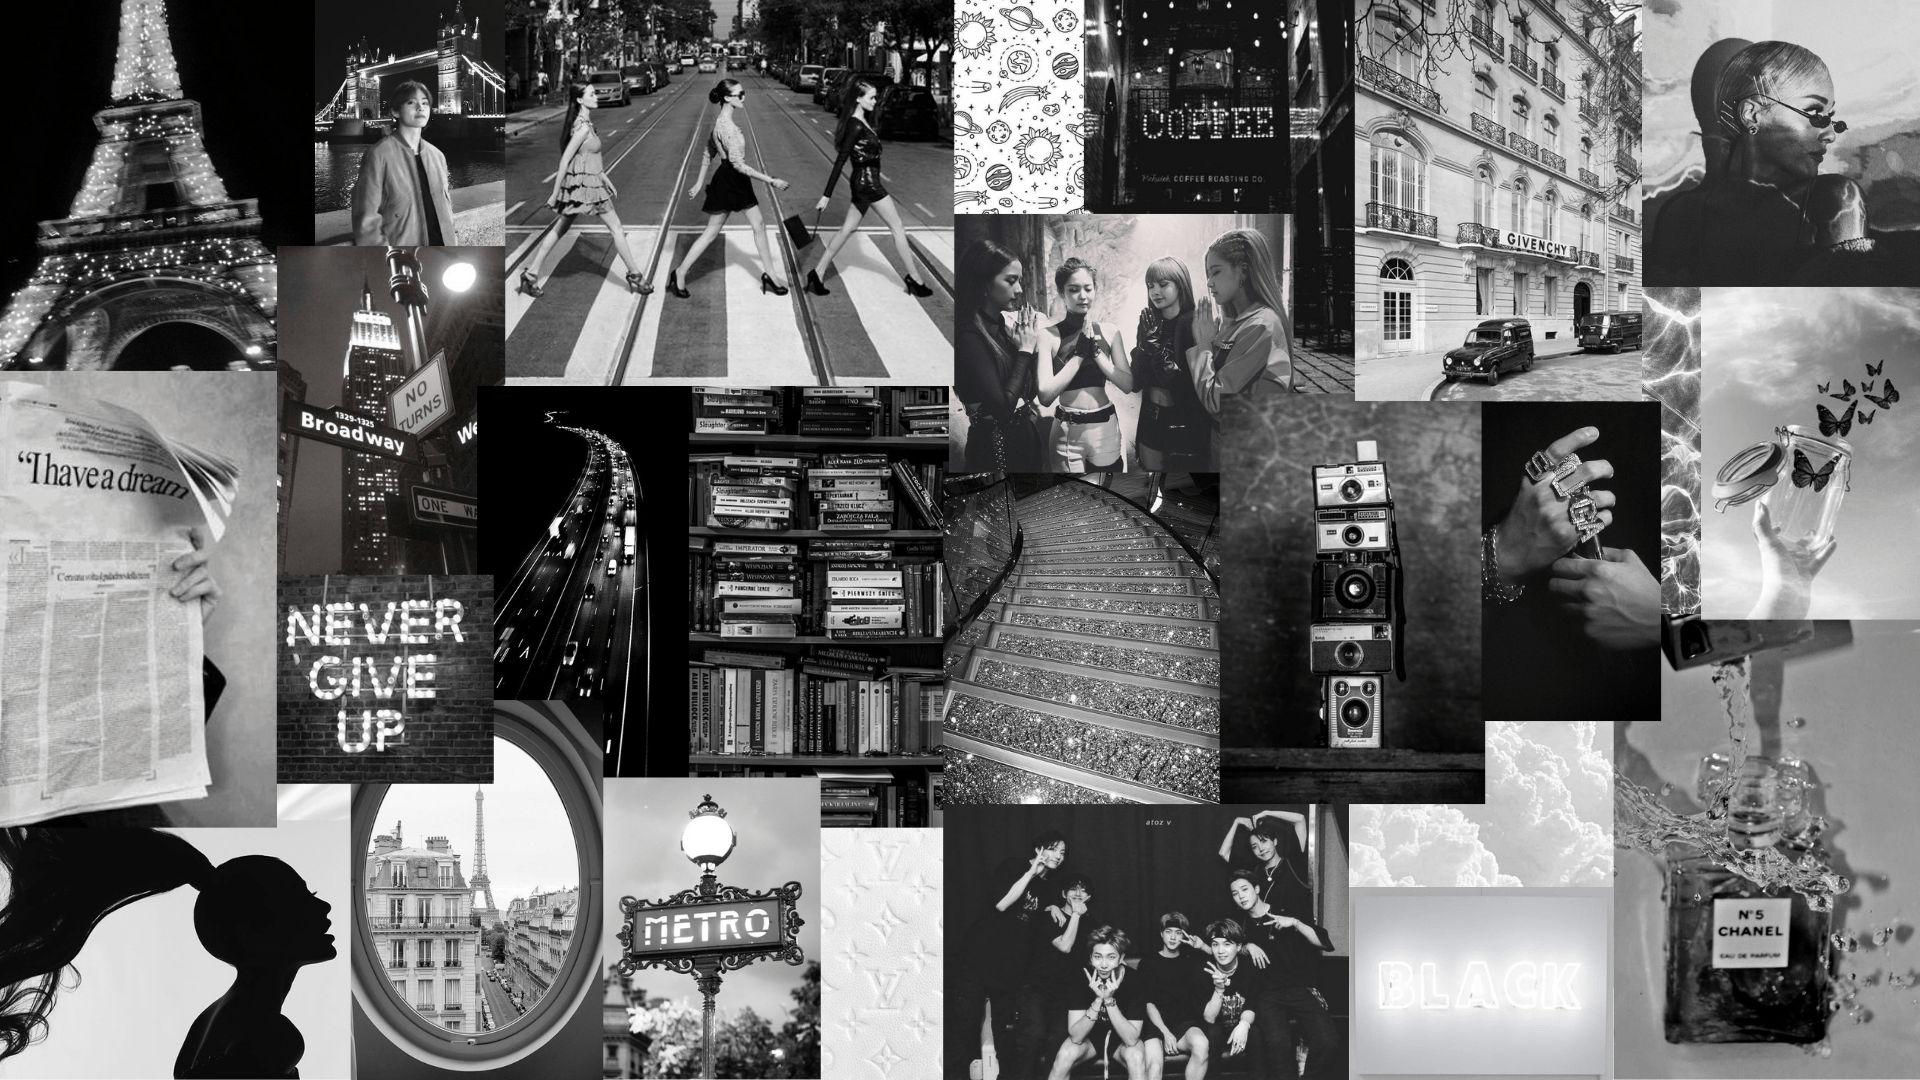 A collage of black and white photos, including a bicycle, books, a Chanel bottle, and a picture of the Eiffel Tower. - Broadway, Chromebook